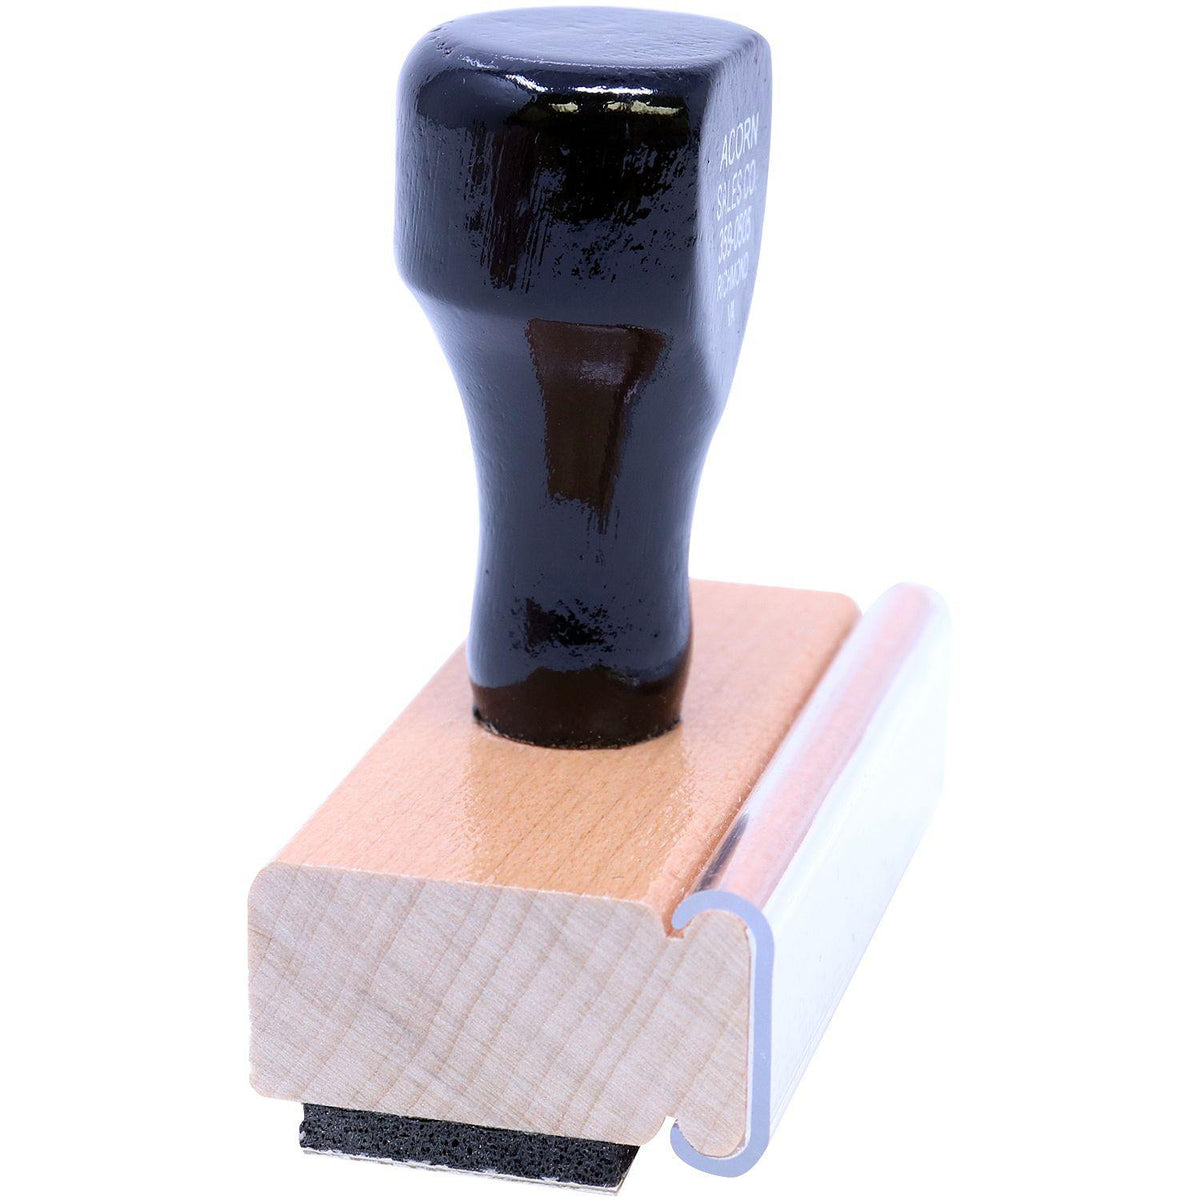 Side View of Large Outline Air Mail Rubber Stamp at an Angle